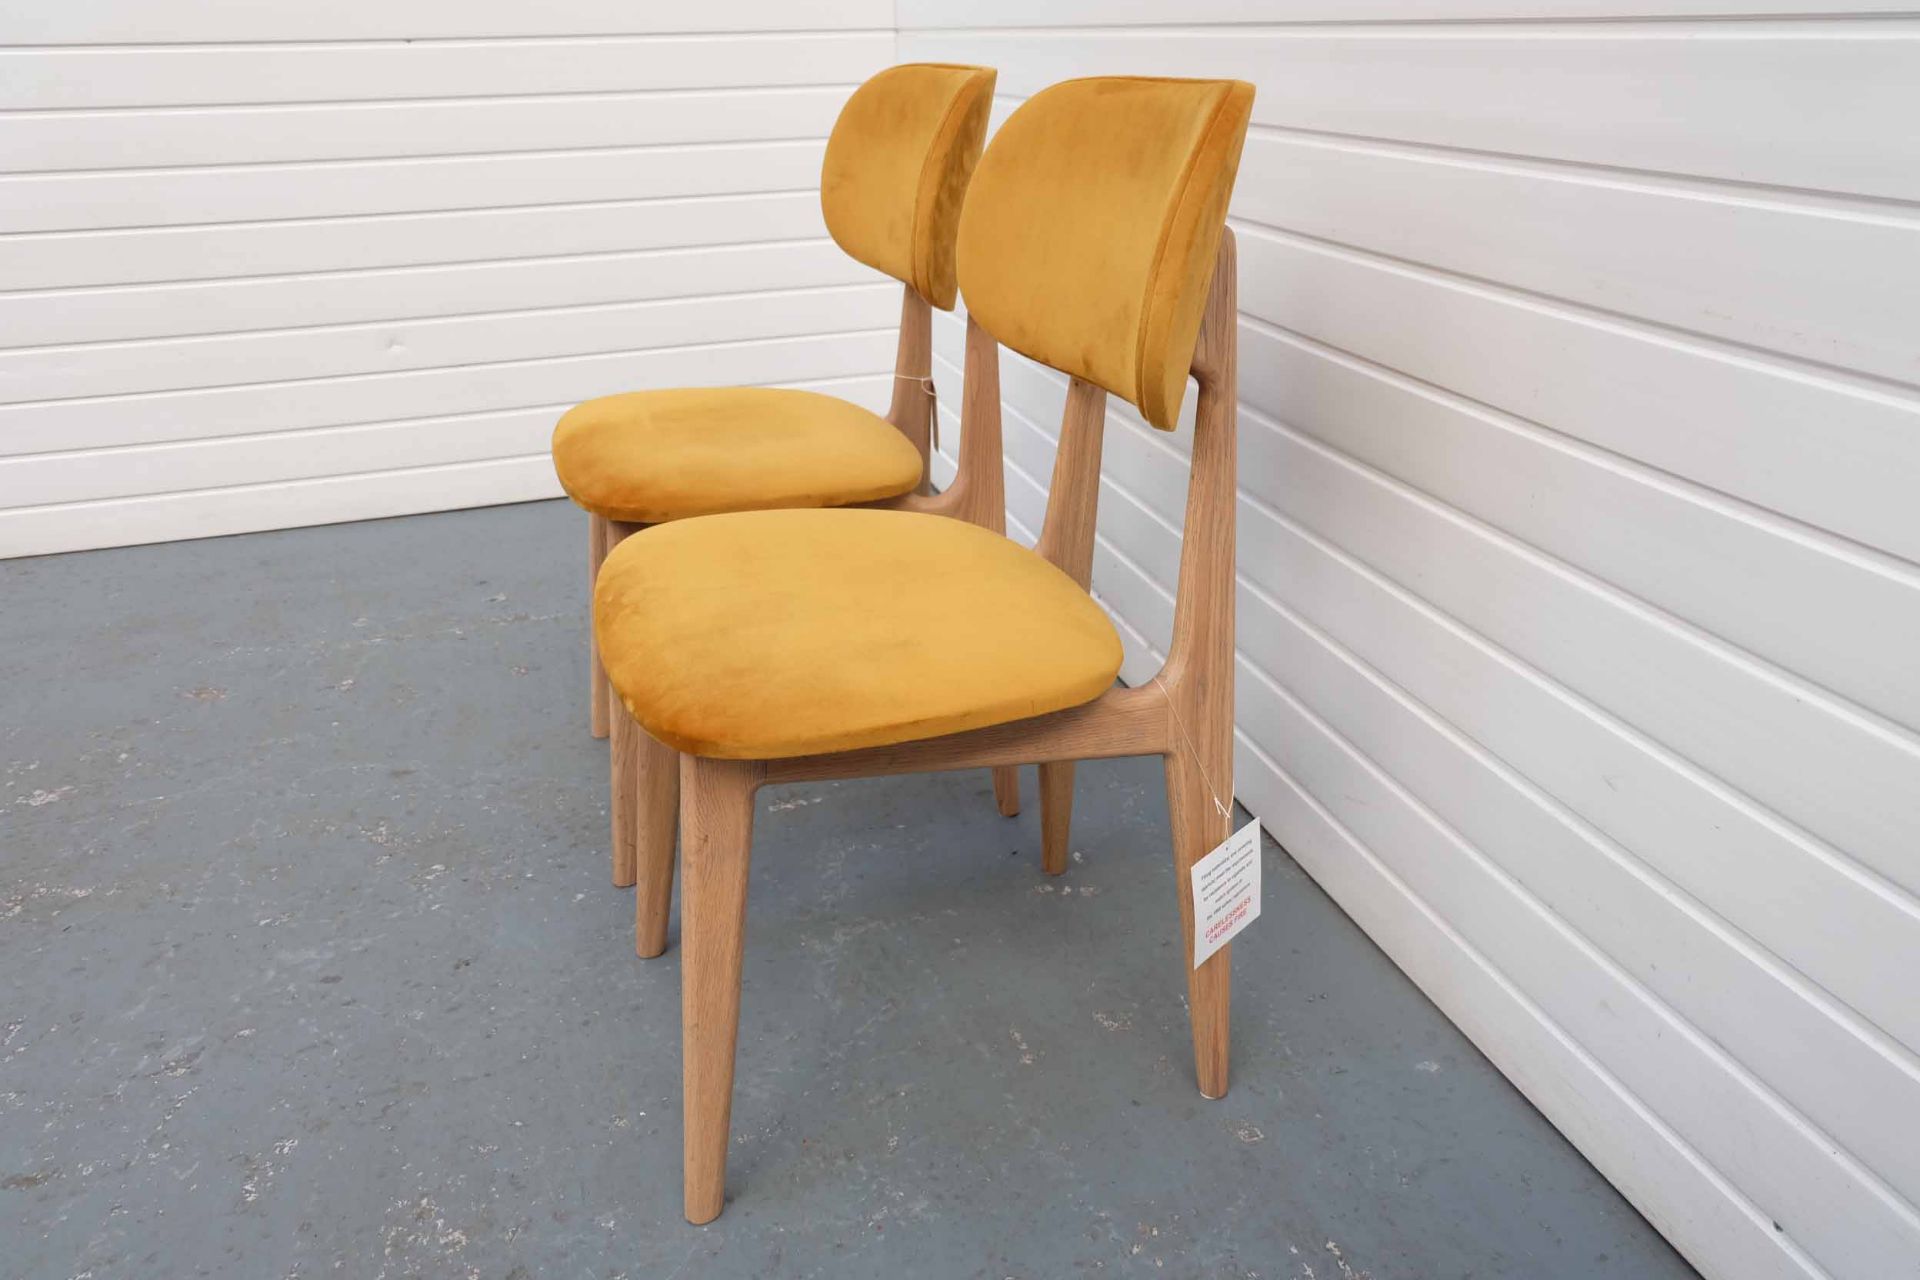 Pair of Carton Furniture 'Bari' Dining Chairs. Upholstered Seat and Back in Mustard Velvet. - Image 4 of 6